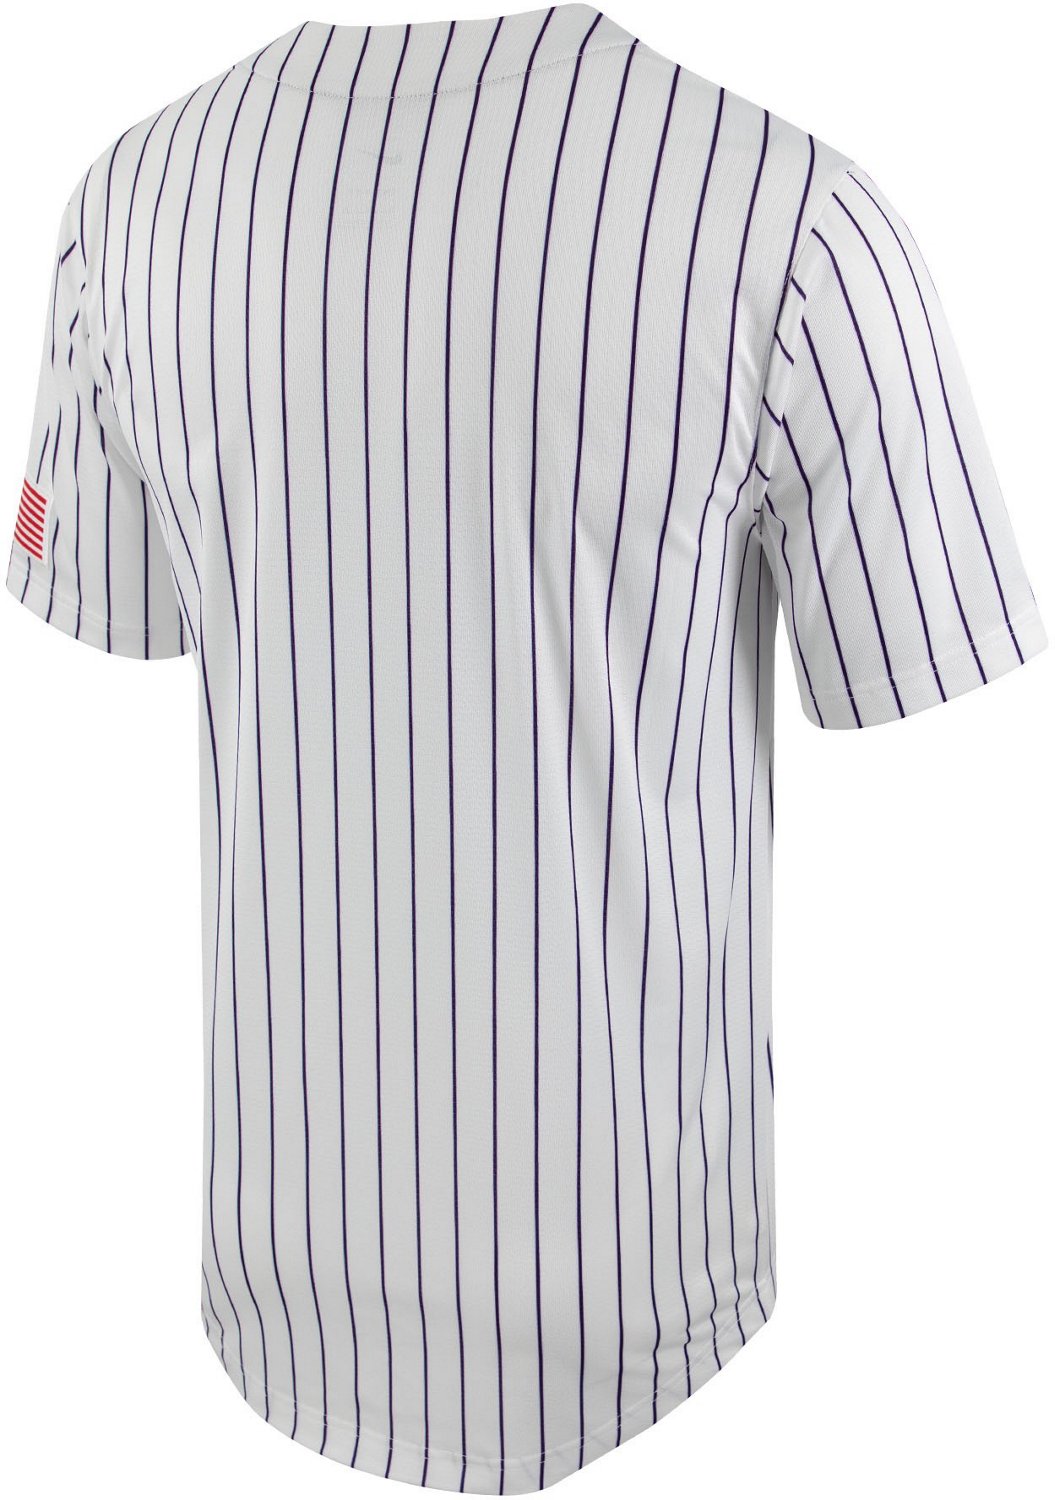  Los Angeles Dodgers Womens Pinstripe Polyester Short Small :  Sports & Outdoors